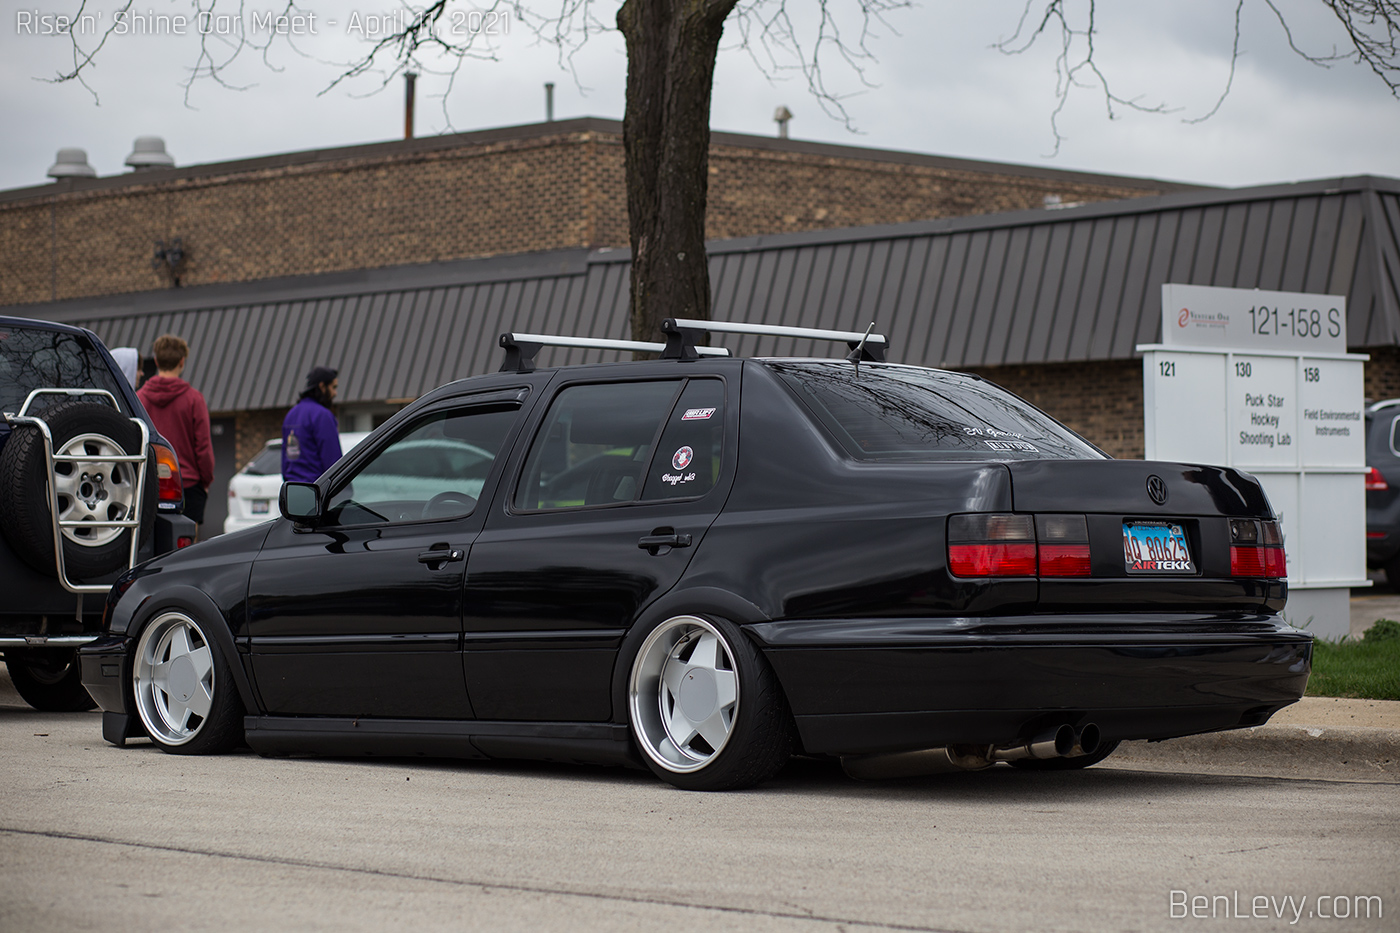 Black Bagged Volkswagen Jetta outside of Chicago Auto Pros Lombard